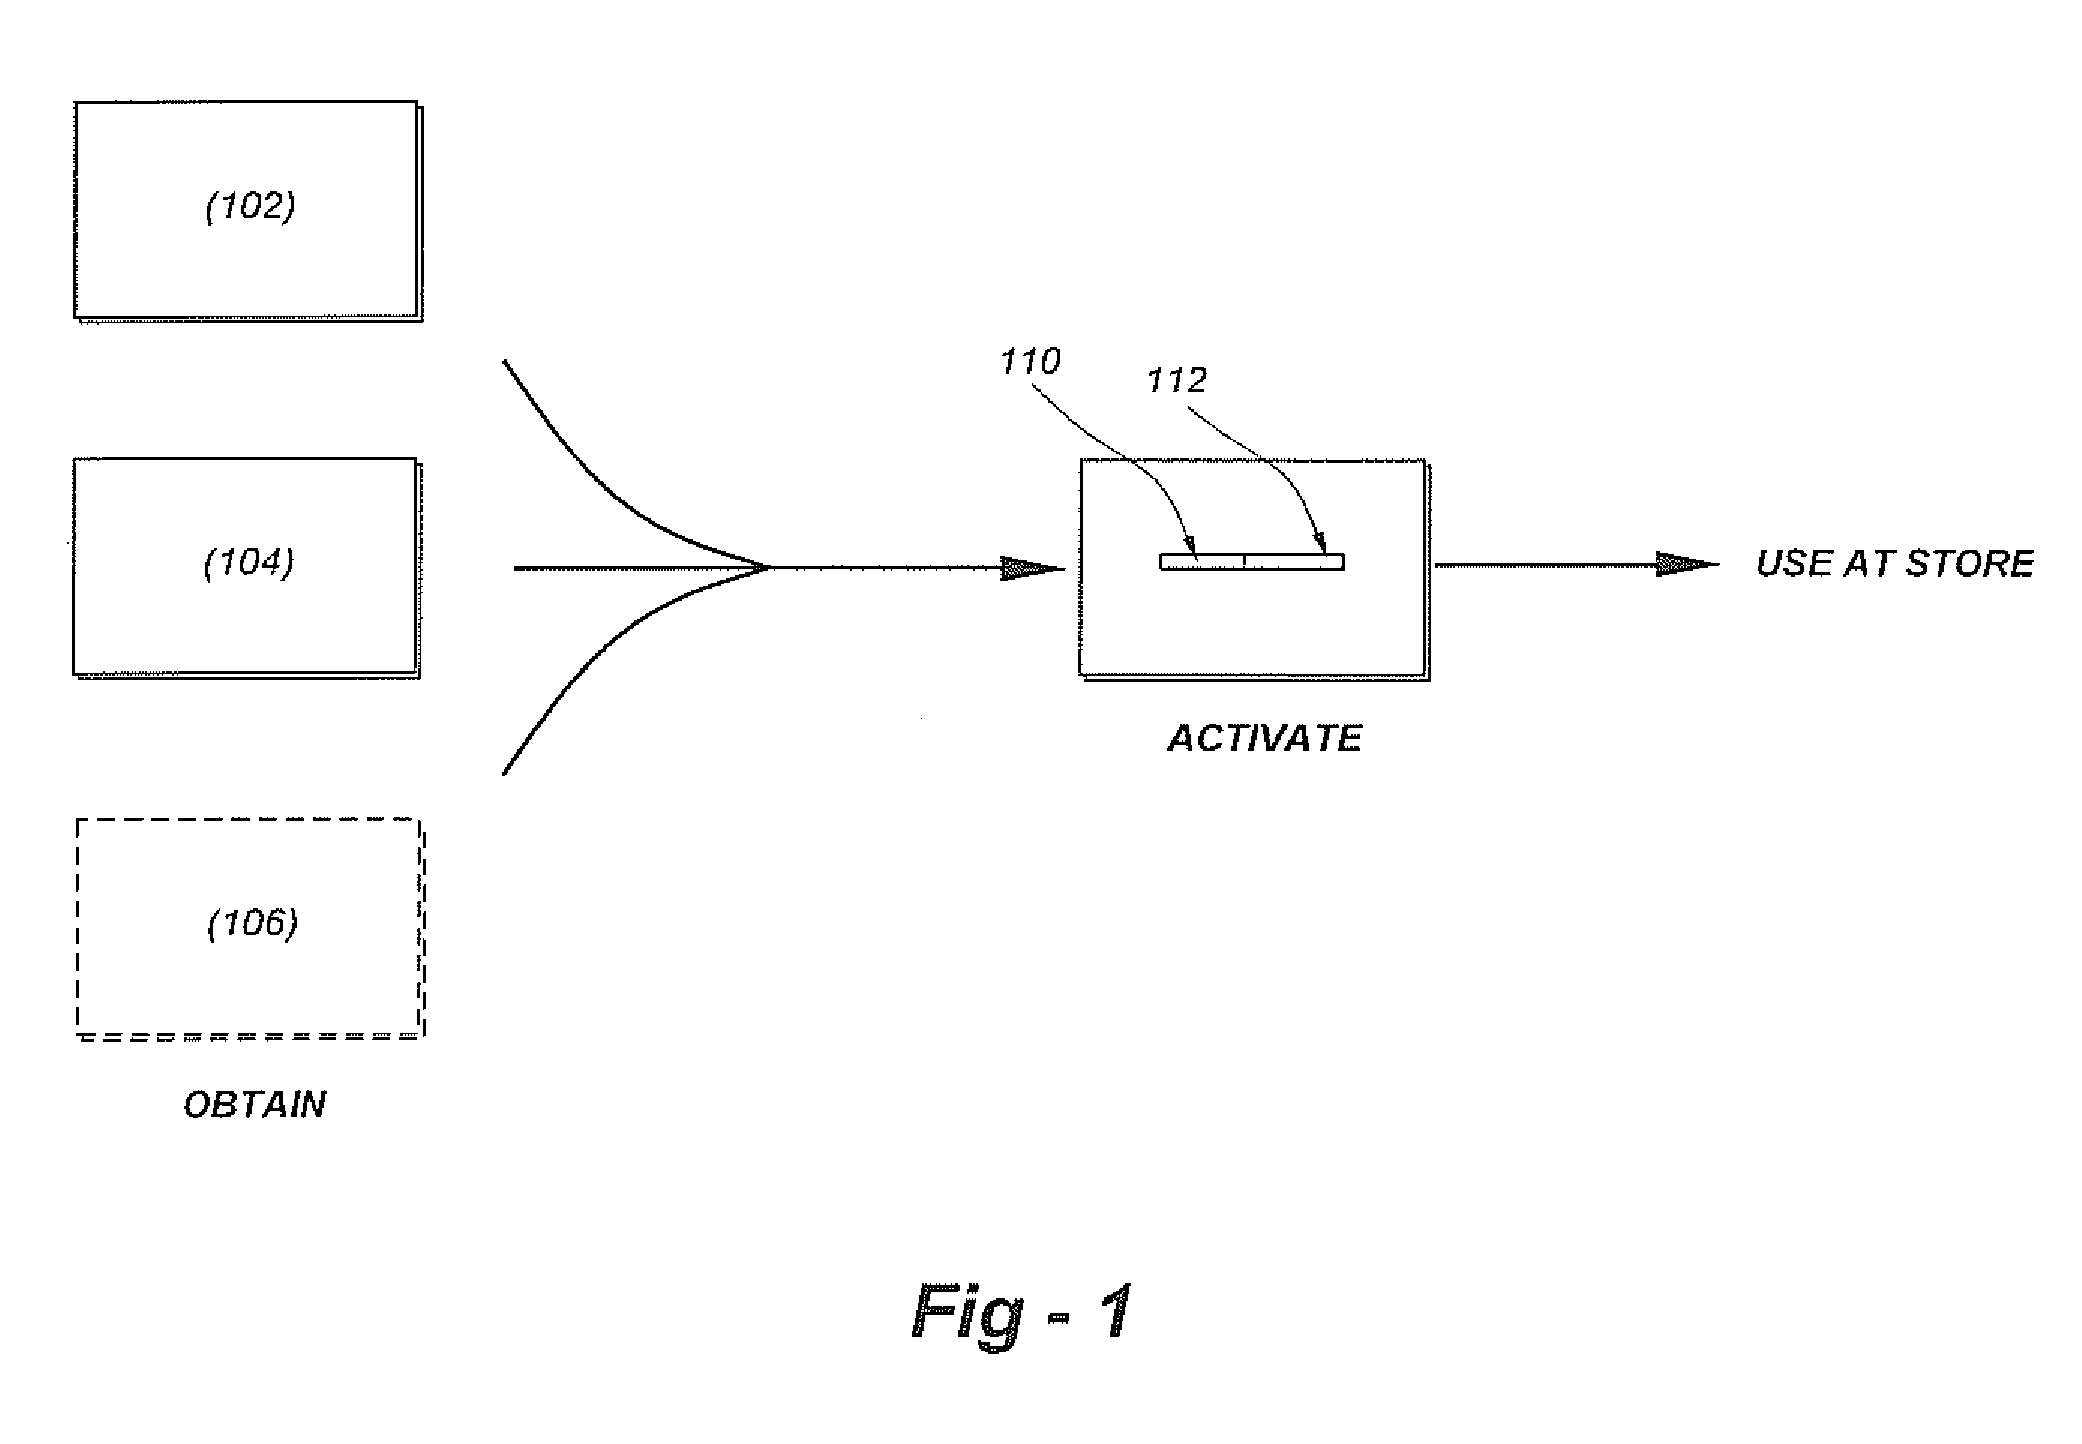 Gift card information sharing system and methods